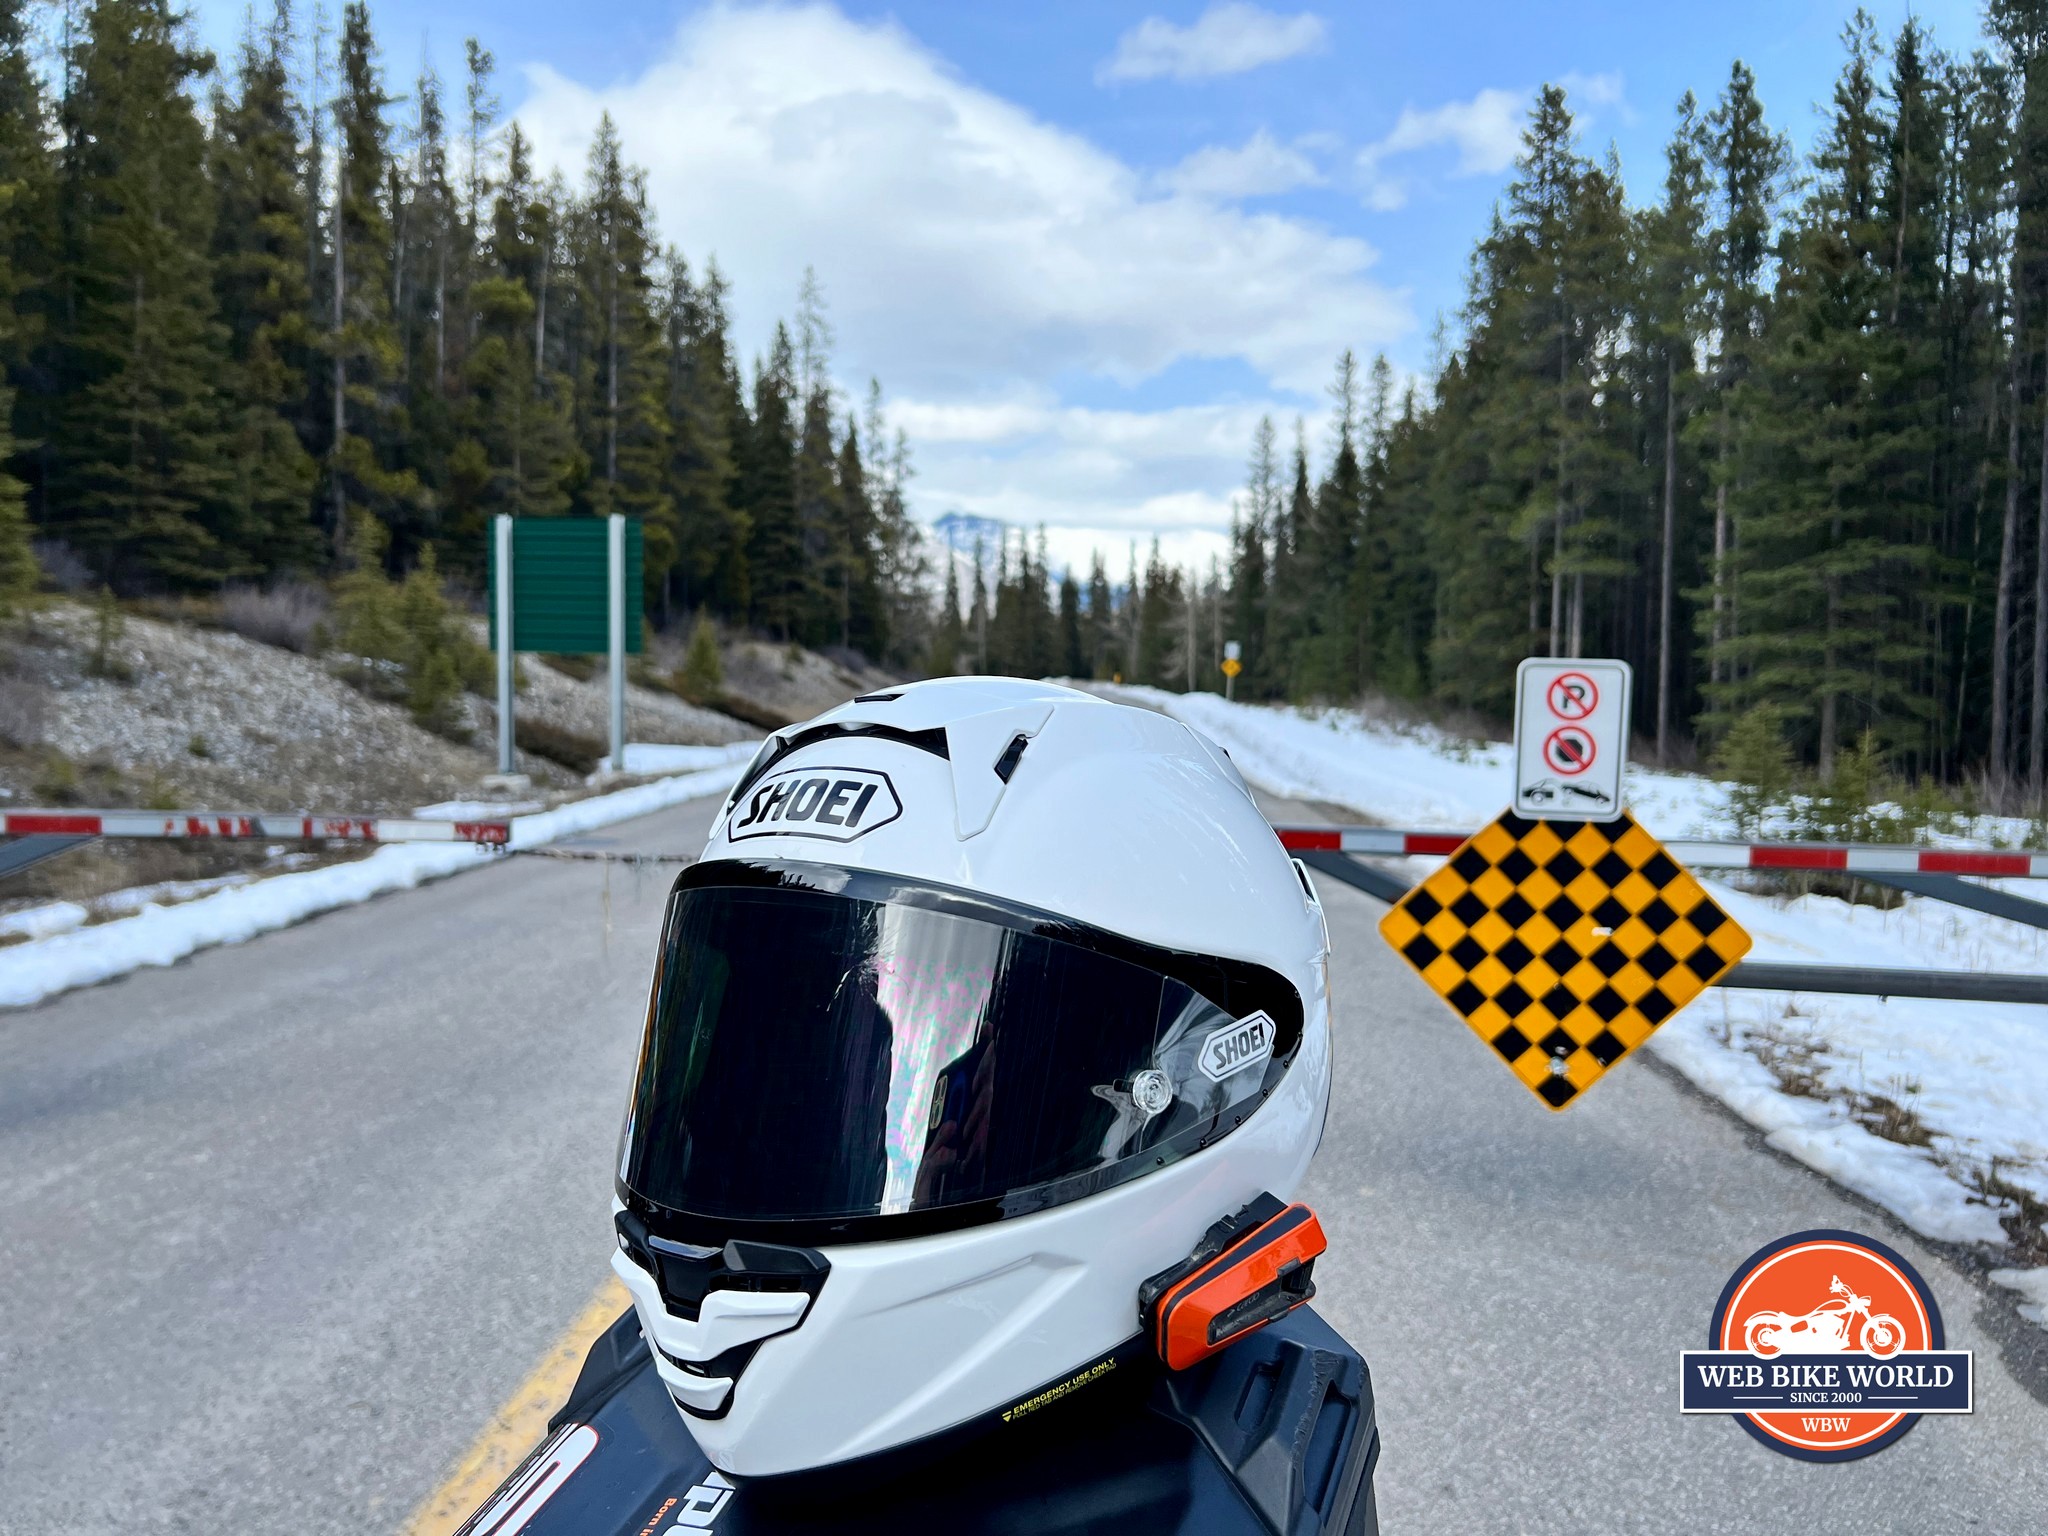 The Shoei X-Fifteen out in the wild near Banff, Alberta.